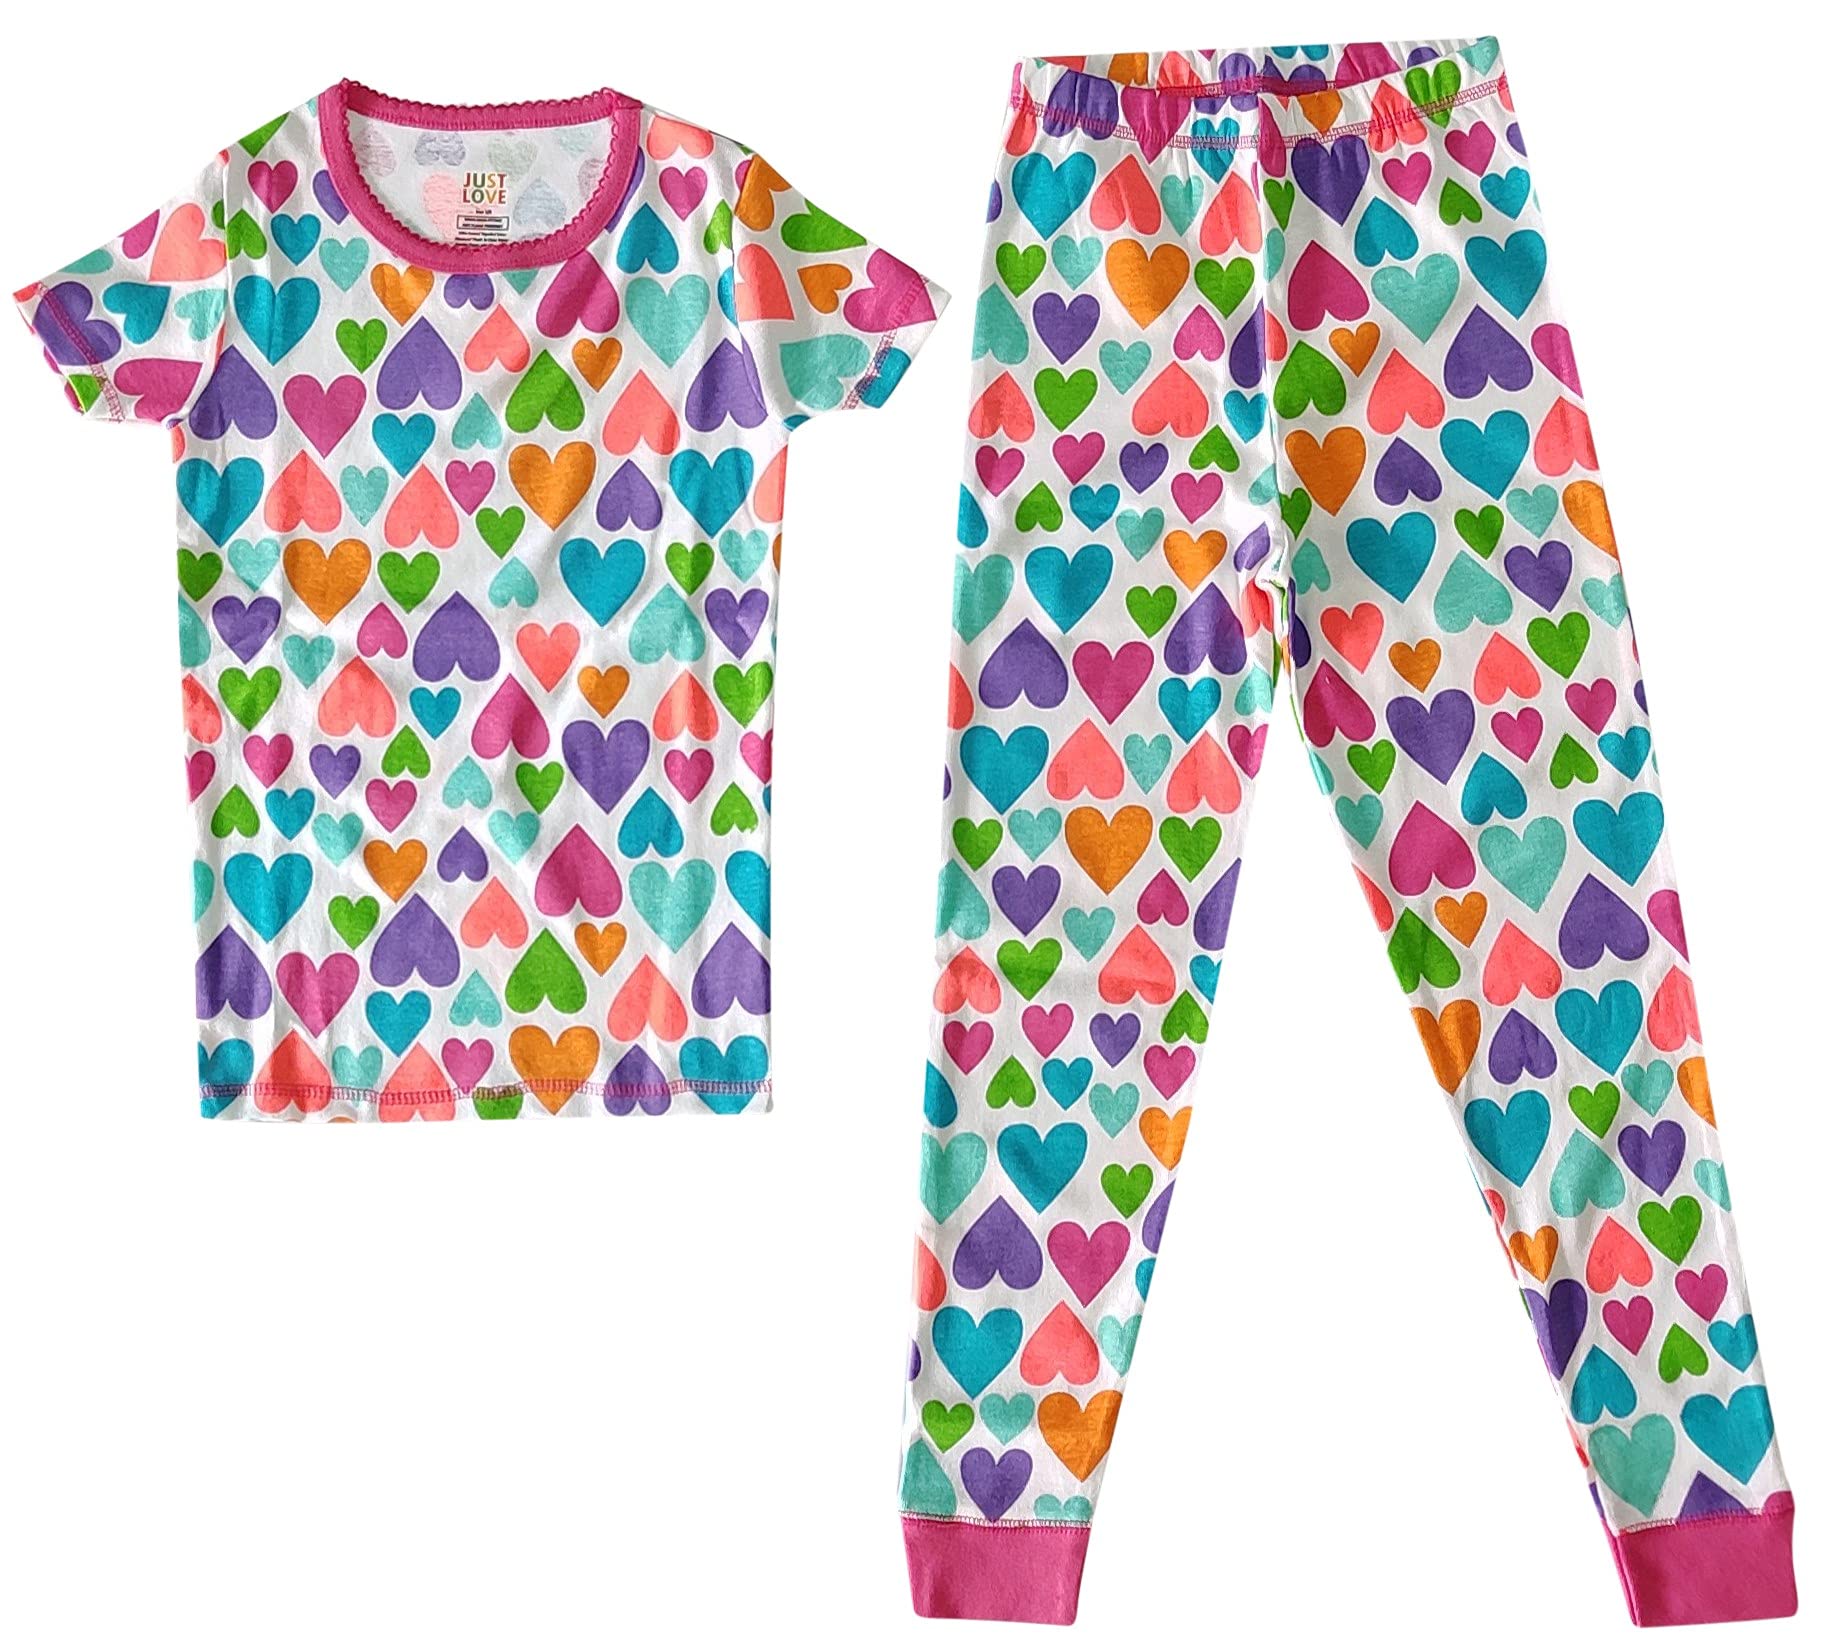 Just Love Cotton Pajamas Sets for Girls 34617-10532-10-12